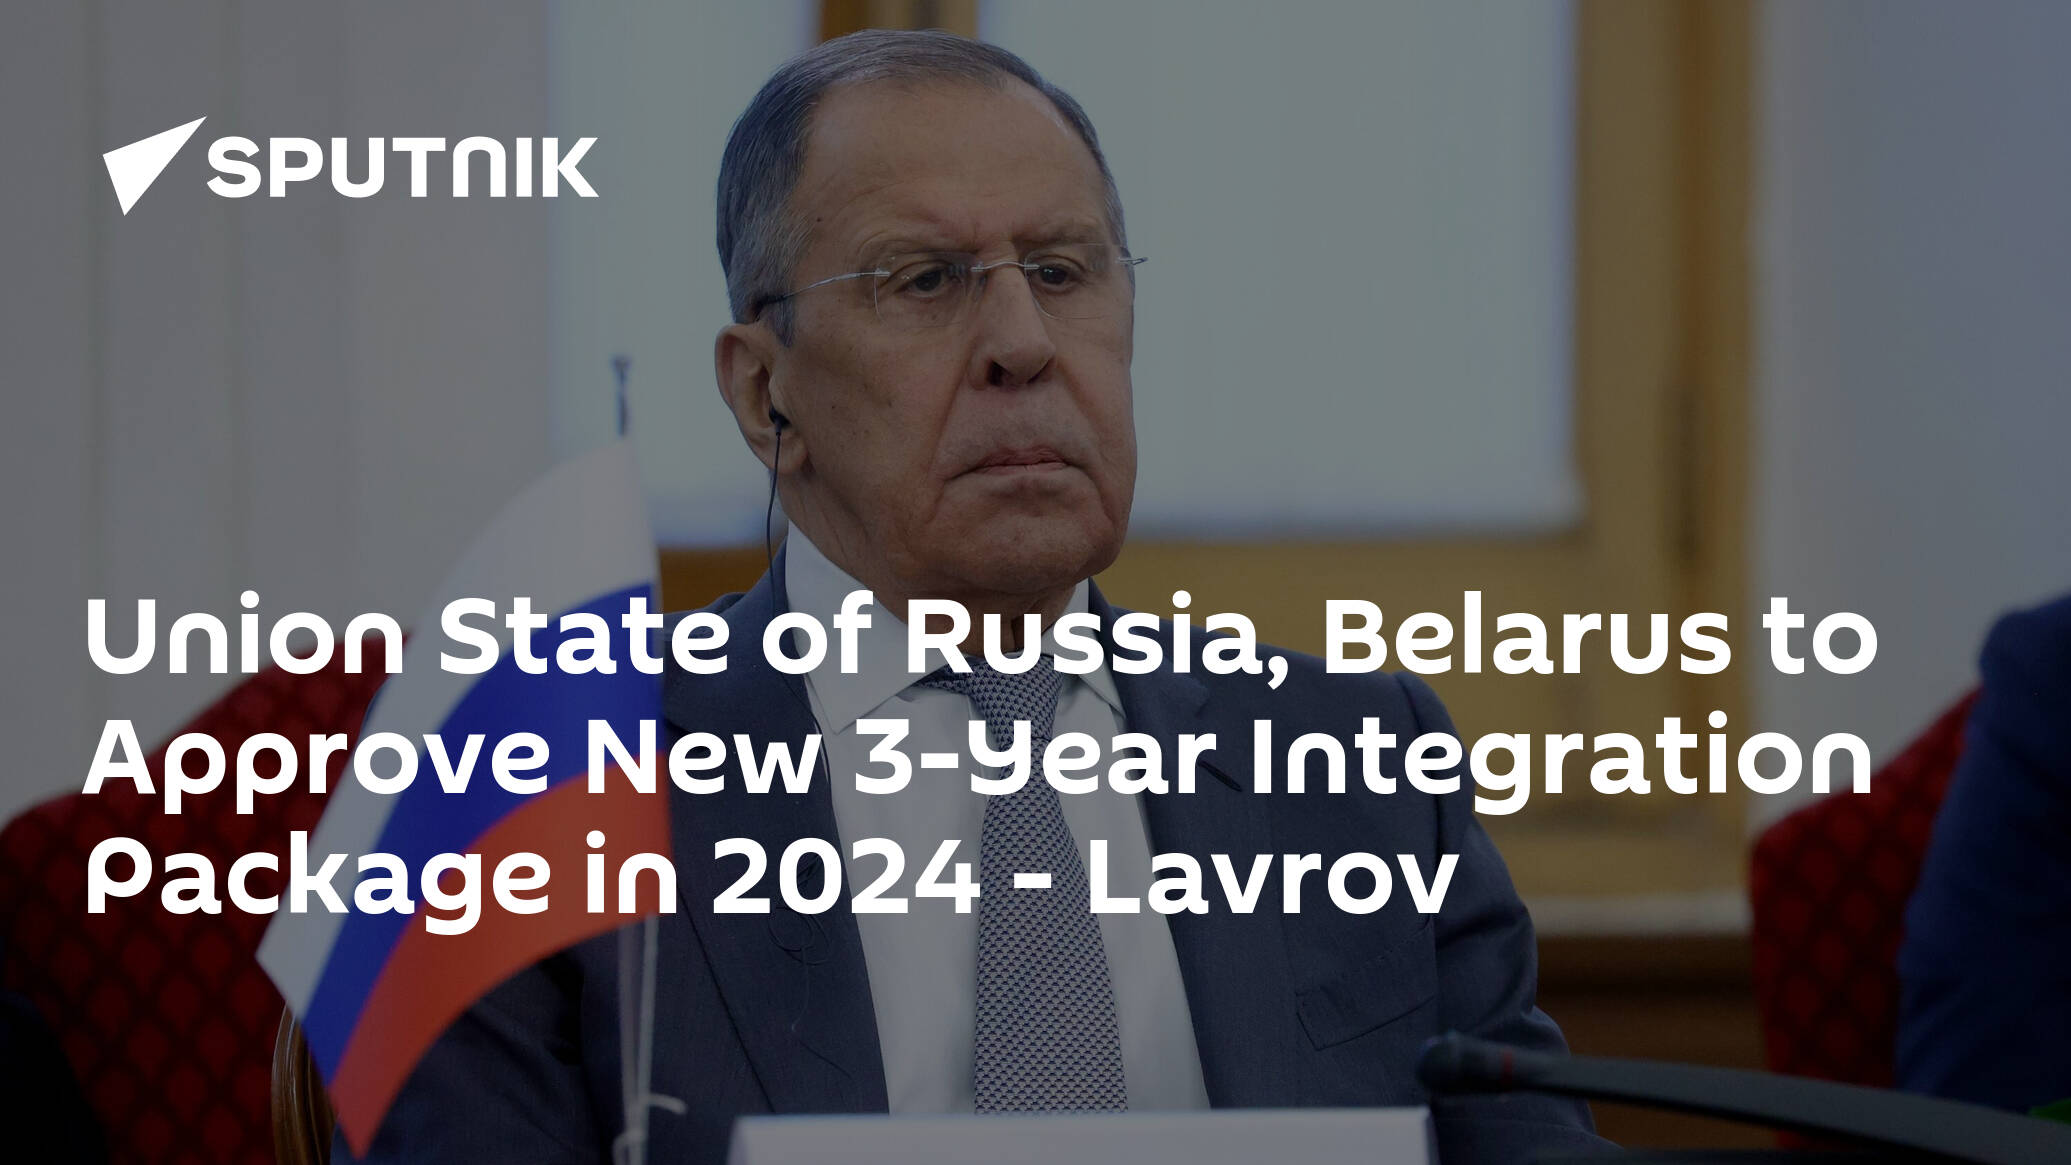 Union State of Russia, Belarus to Approve New 3-Year Integration Package in 2024 – Lavrov